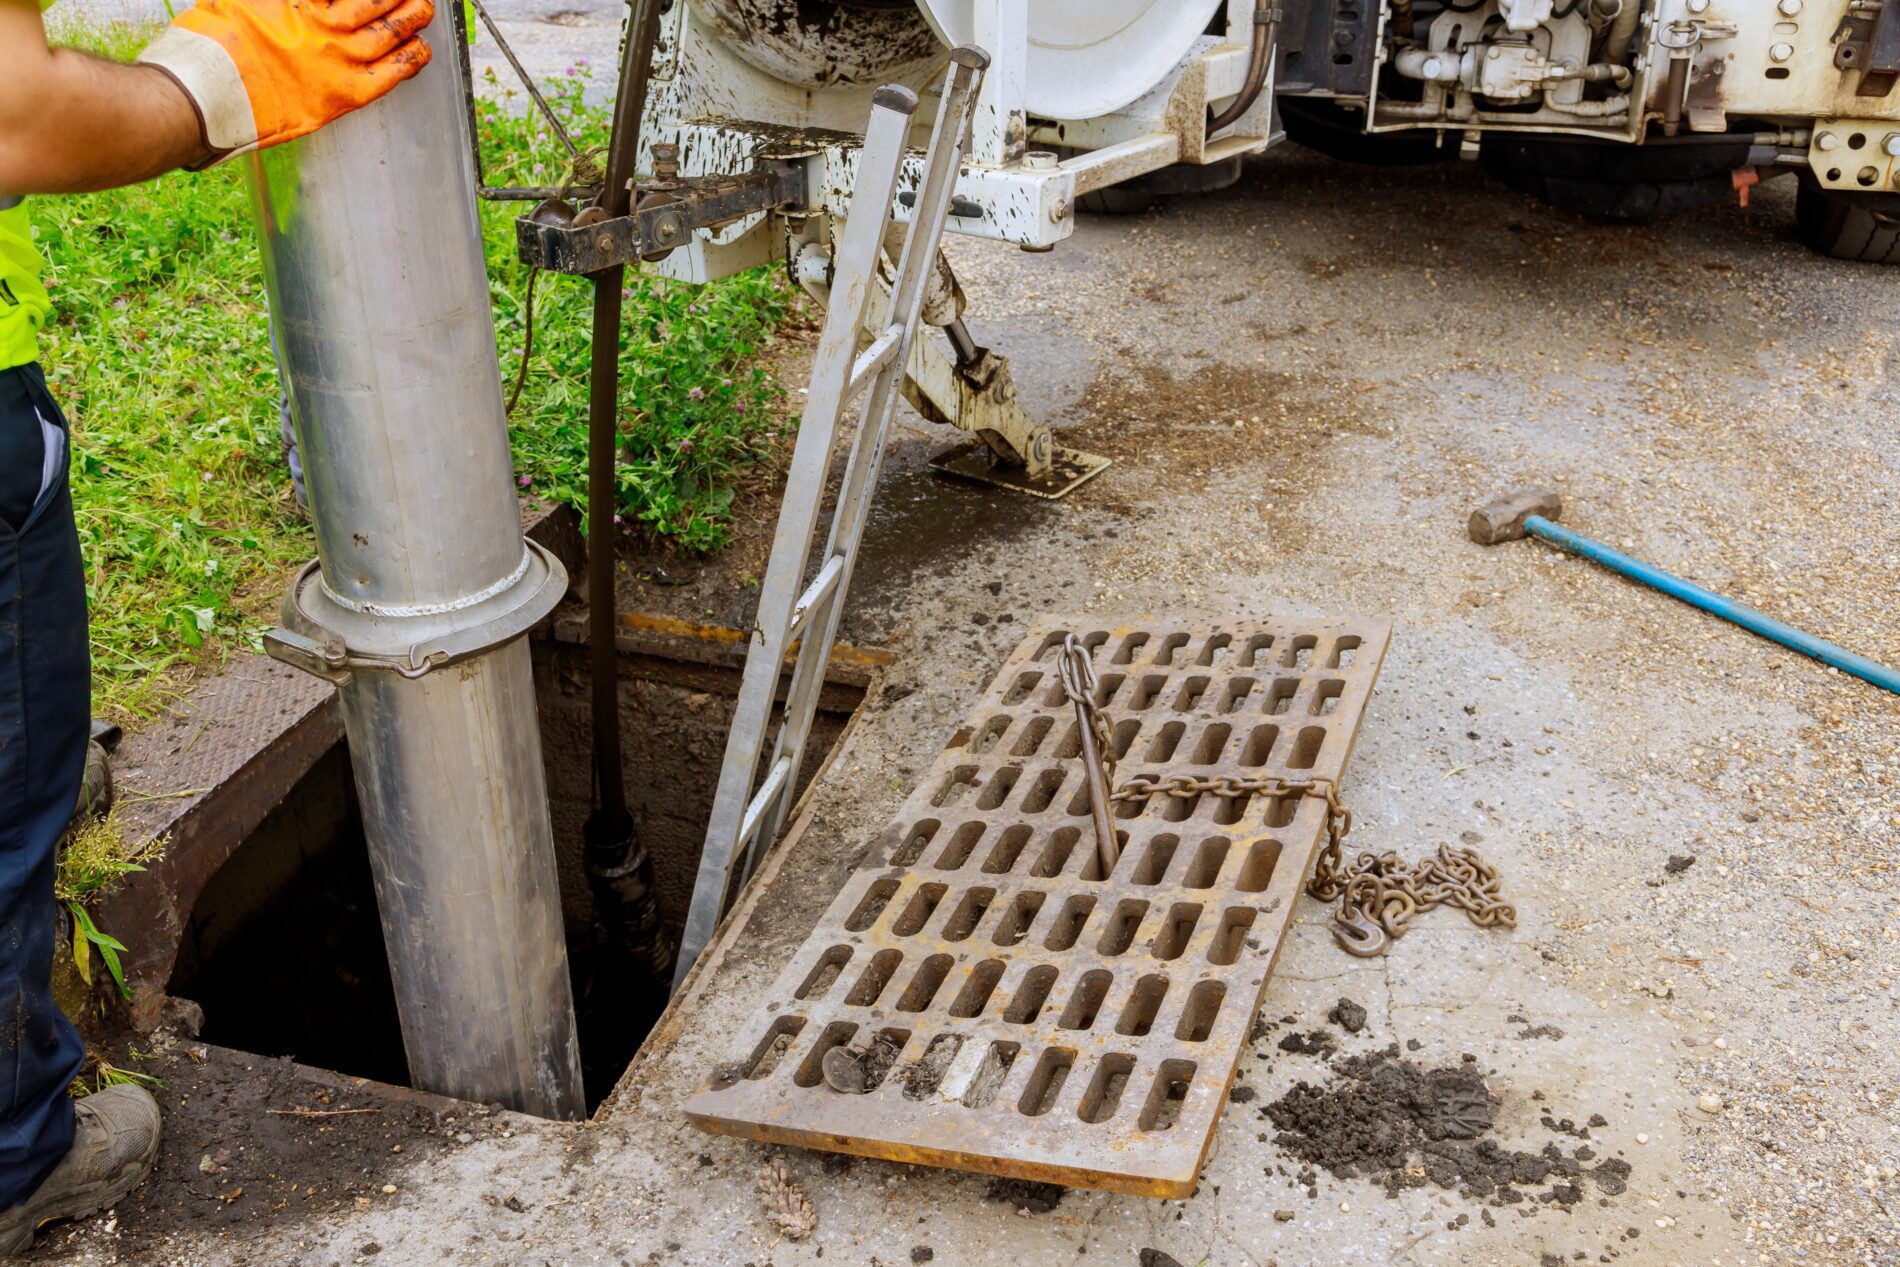 No.1 Expert Sewer Repair Services in Texas - J National